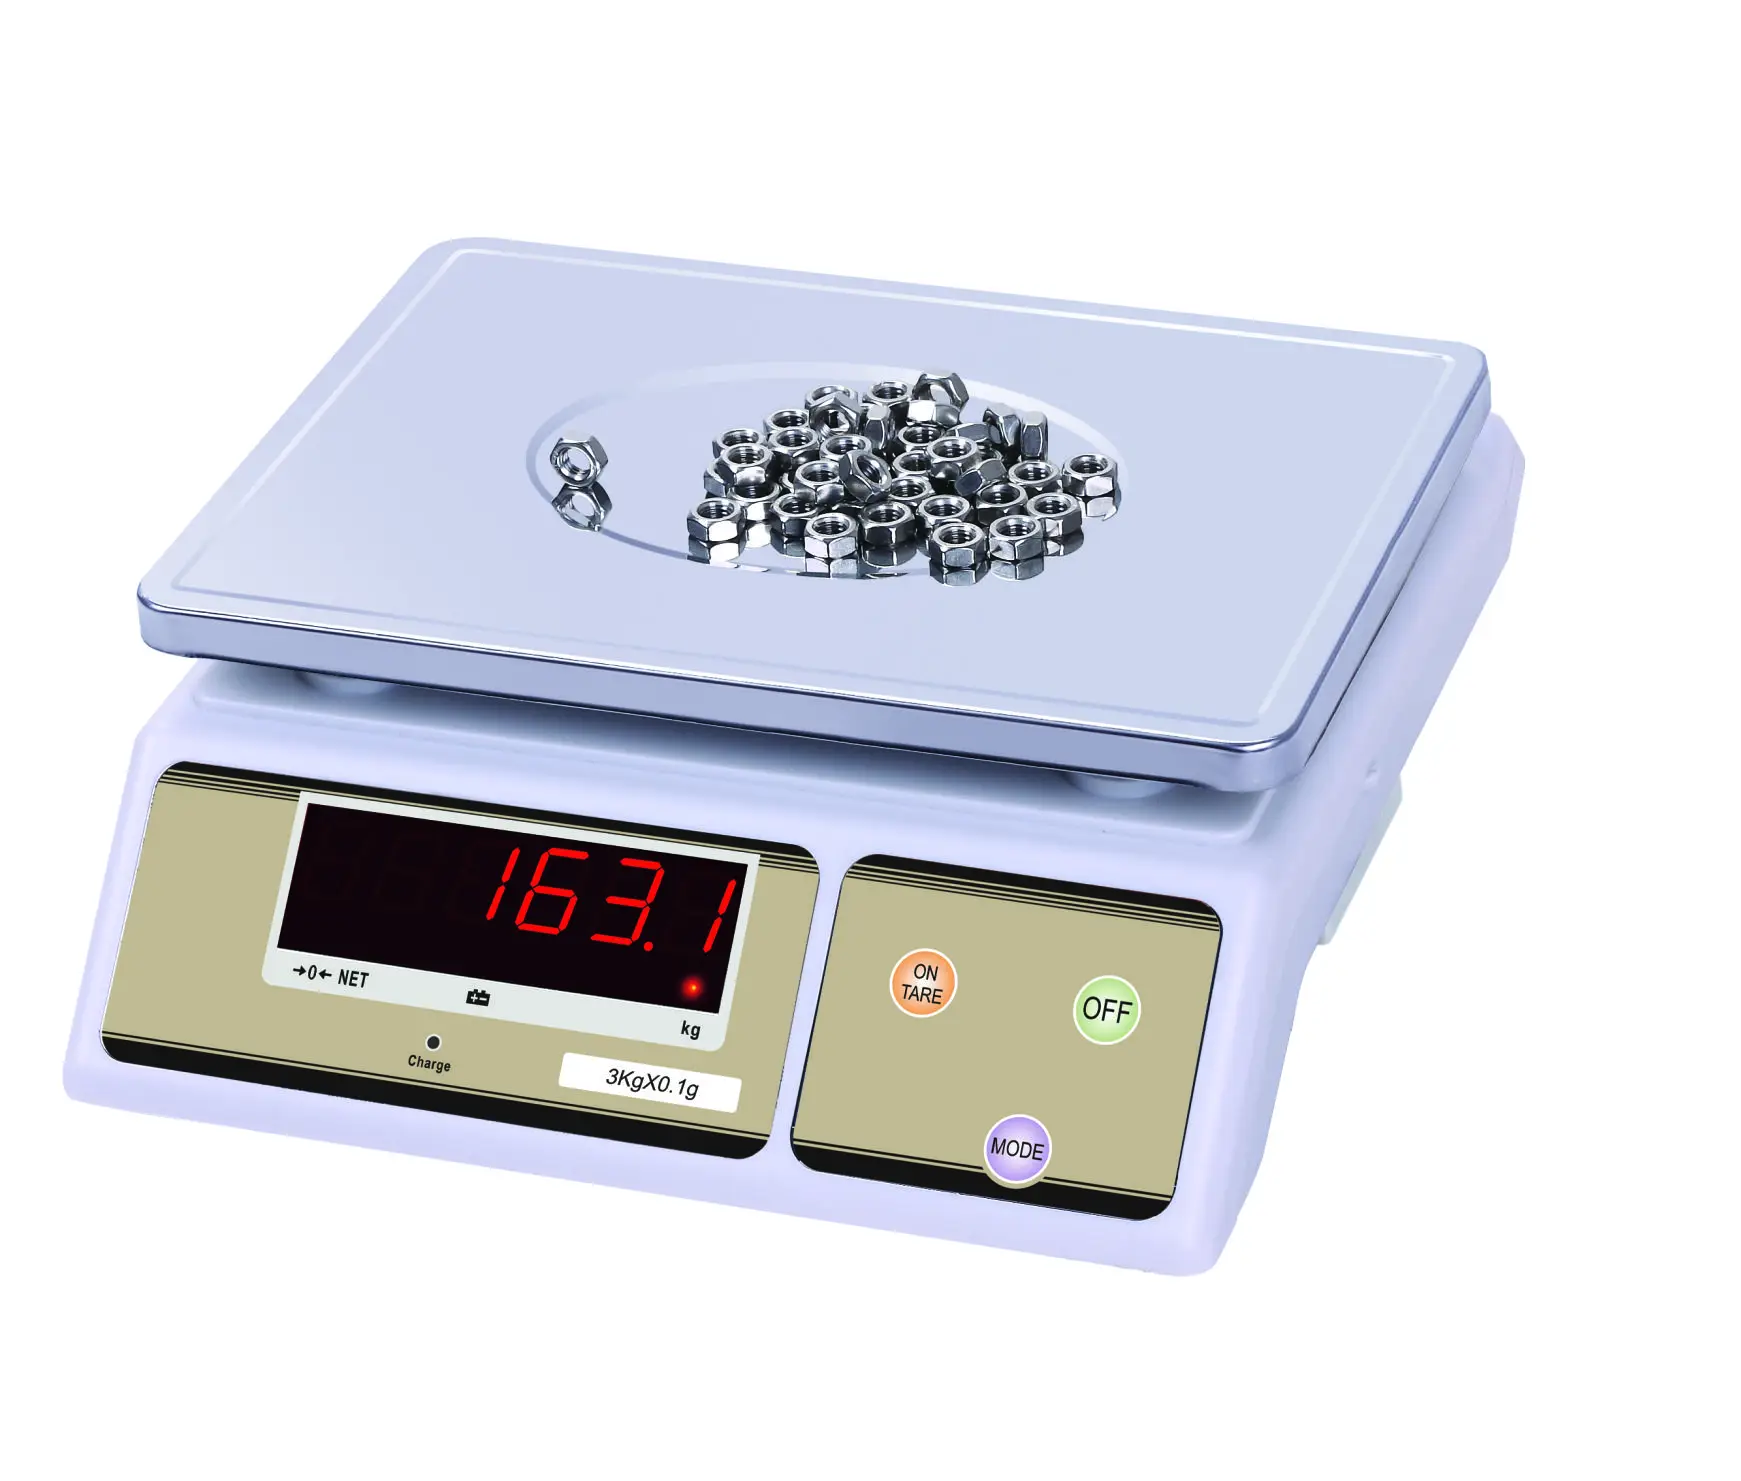 Digital Weighing  Scale kitchen scale3Kg 0.1g 6Kg0.2g 15Kg0.5g 30kg1gFood Scales Digital Weight Gram and Oz Scale with LCD/ Tare 50g 0 001g electronic scales lcd digital scale 0 001g stainless weighing pan jewelry medicinal mini lab weight milligram scale